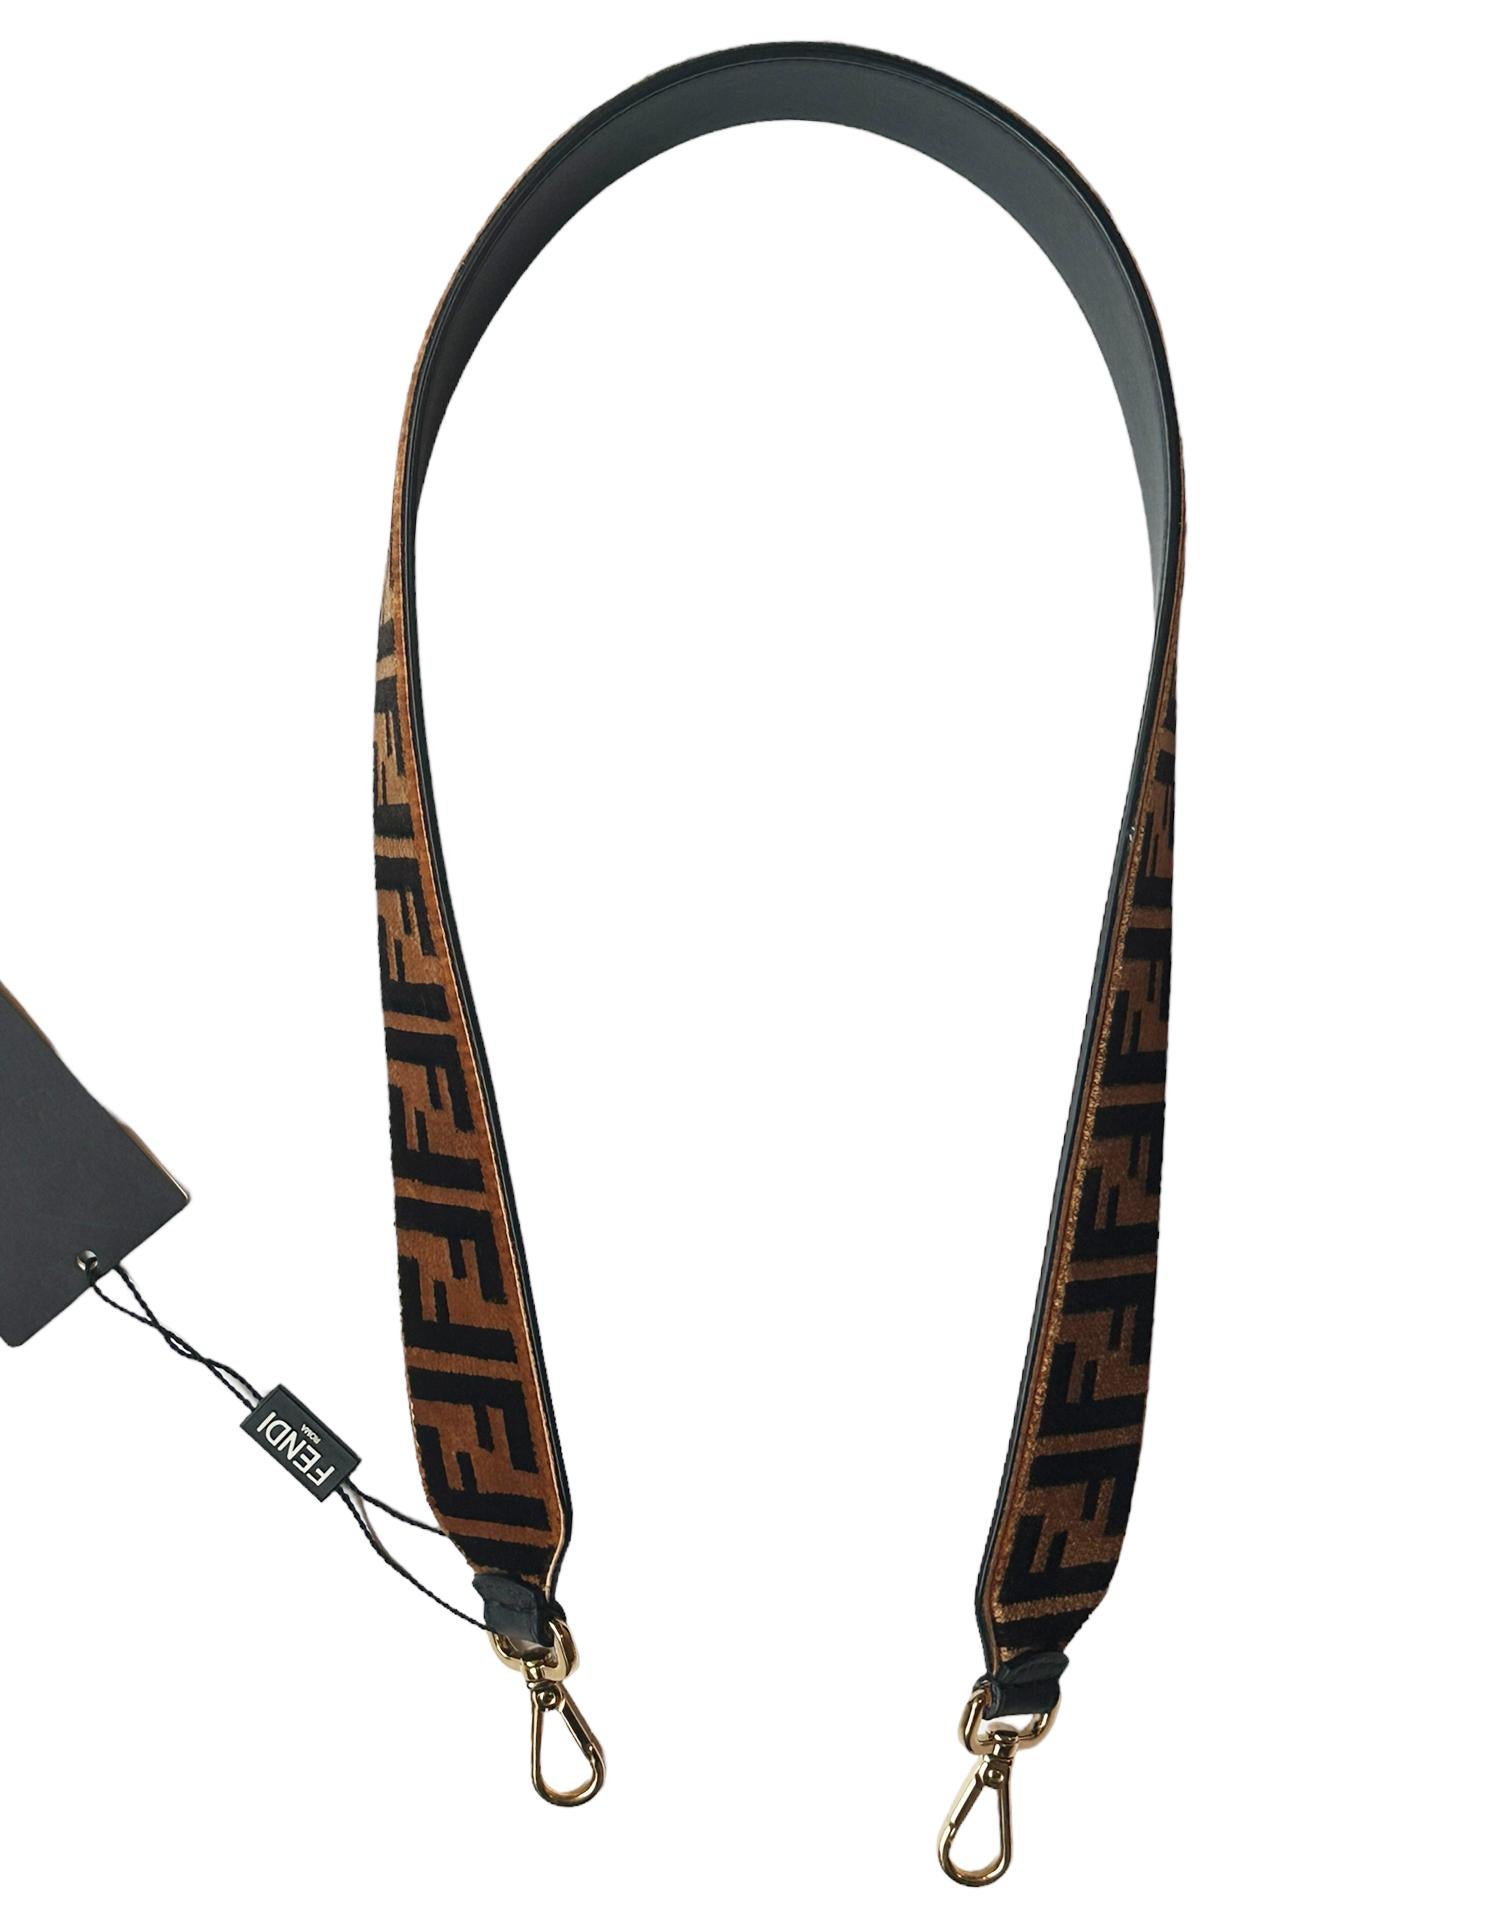 Fendi Brown Zucca Monogram Textured Velvet Strap You

Made In: Italy
Year of Production: 2020-2023
Color:  Brown
Hardware: Goldtone
Materials: 100%calf leather, 95%polyester,5%resin, embroidery:100%viscose
Closure/Opening: Two hooks
Overall